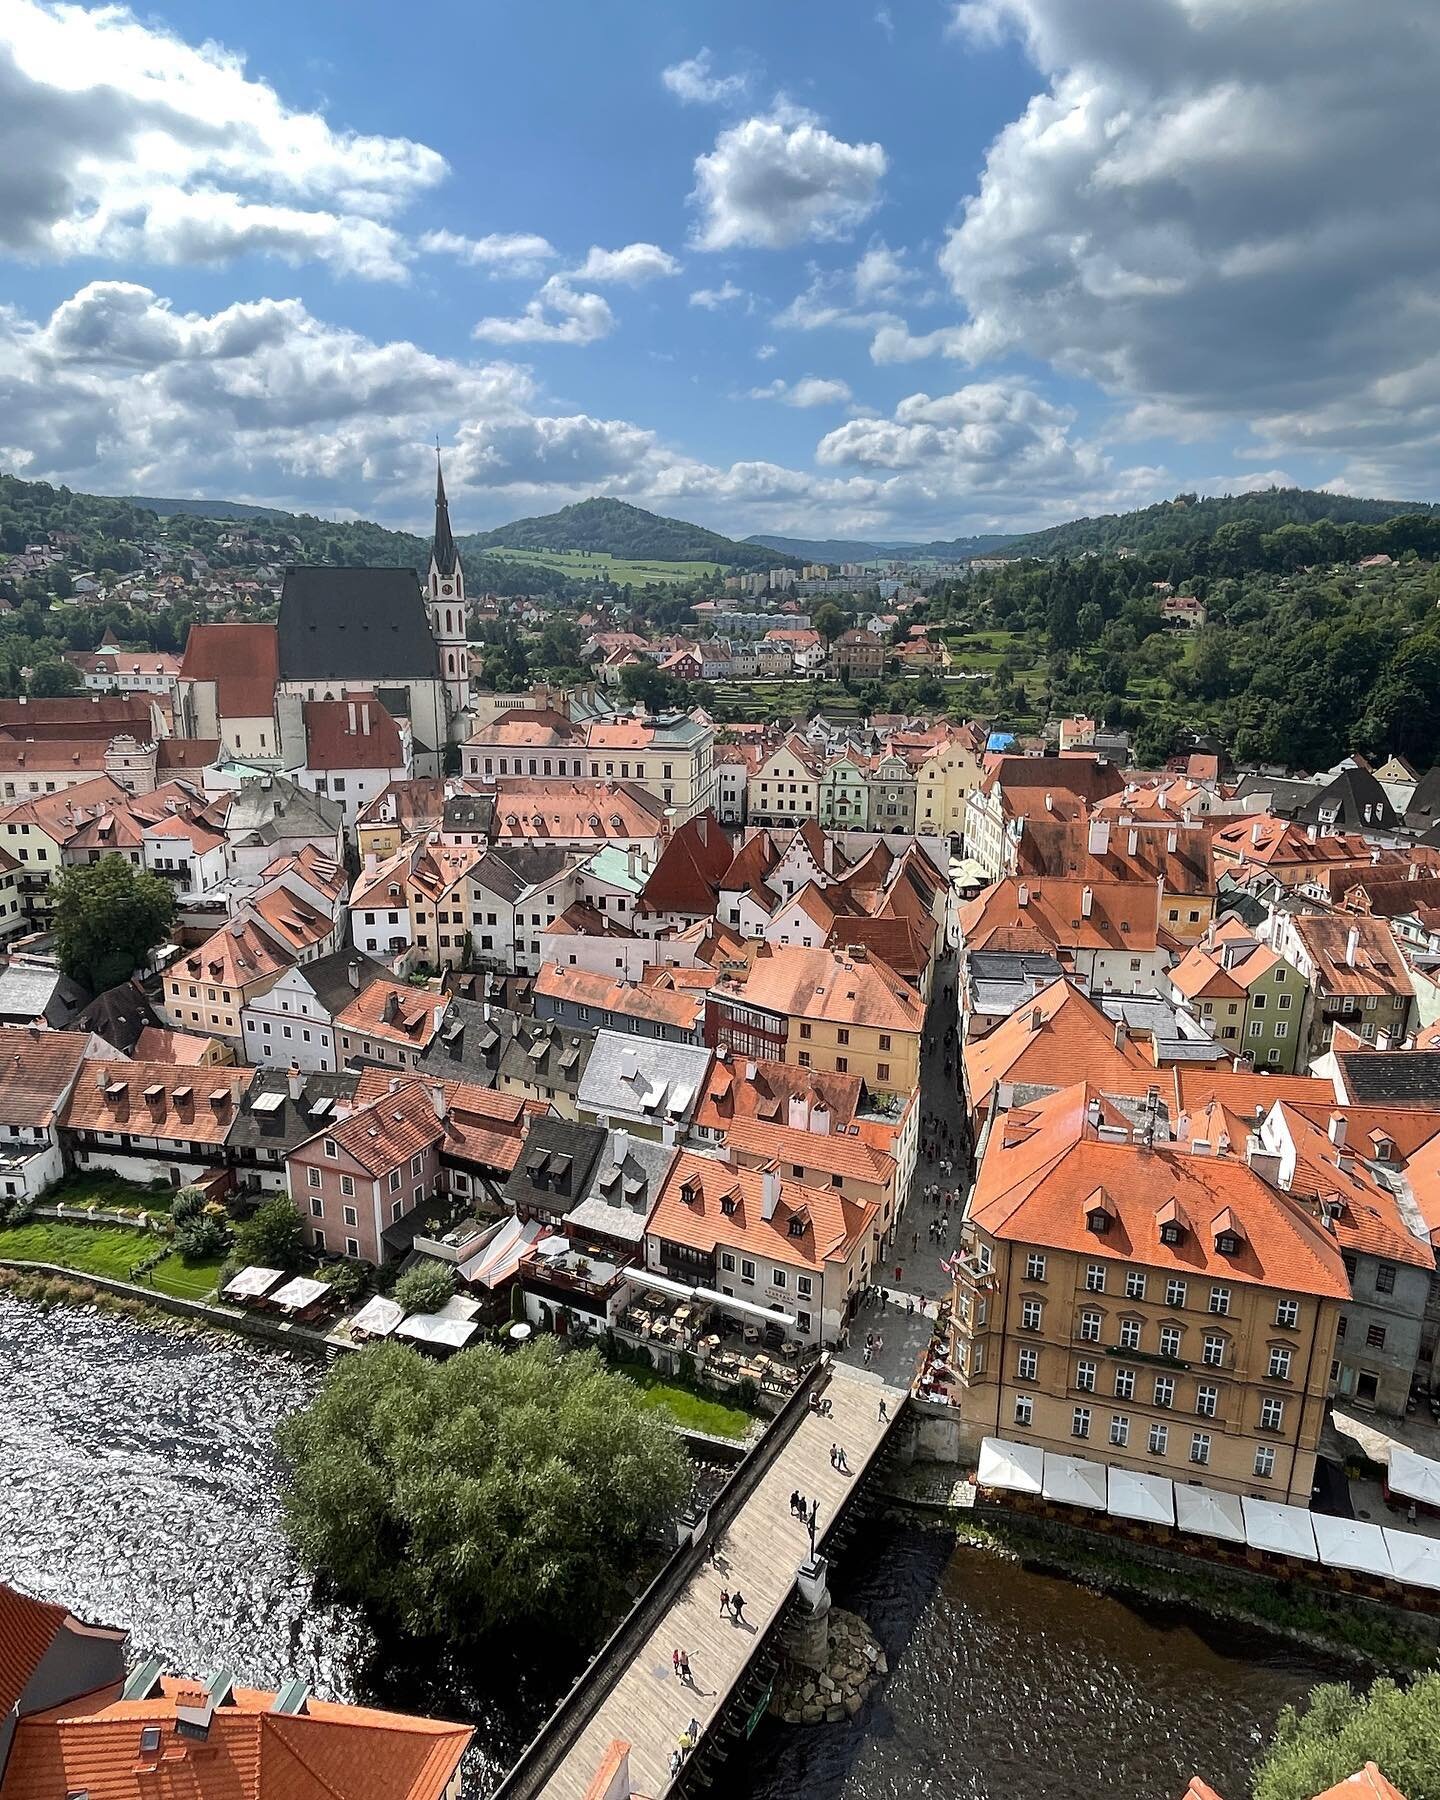 Visited the magical town of Cesky Krumlov in Czech Republic last week. The area&rsquo;s oldest settlement dates back to the Stone Age, the castle founded in 1250 is one of the oldest in Central Europe. The entire town&rsquo;s buildings full of gothic